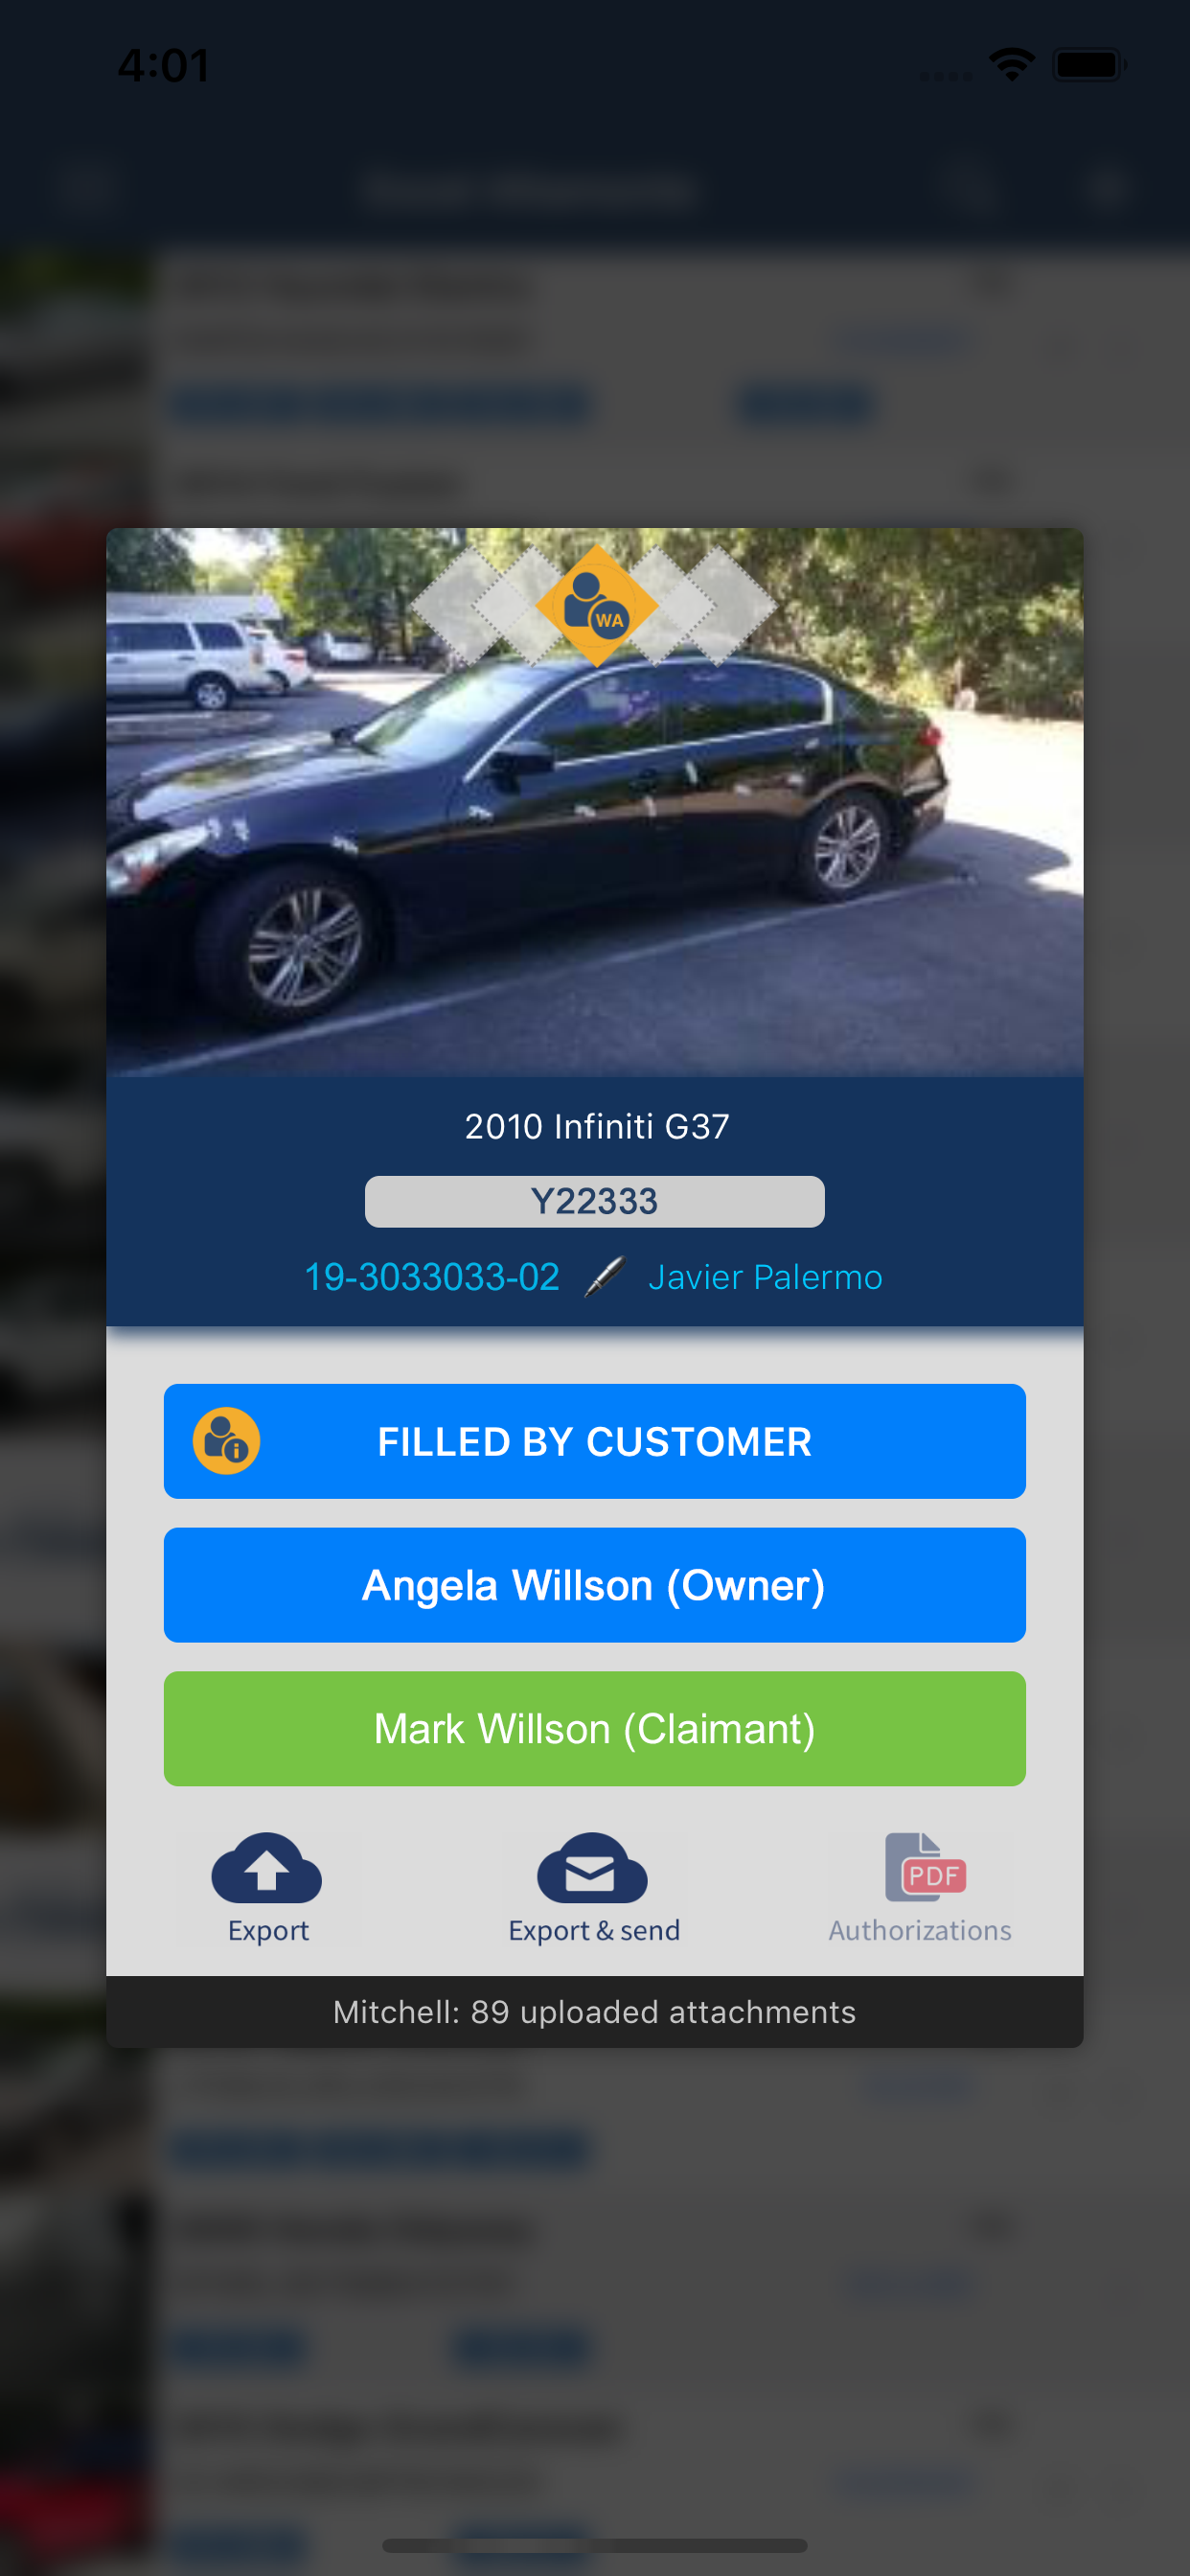 The Electronic Paperwork feature allows customers to complete all necessary paperwork and authorizations without having to visit the body shop in person, saving lots of time and providing a more convenient experience for customers.